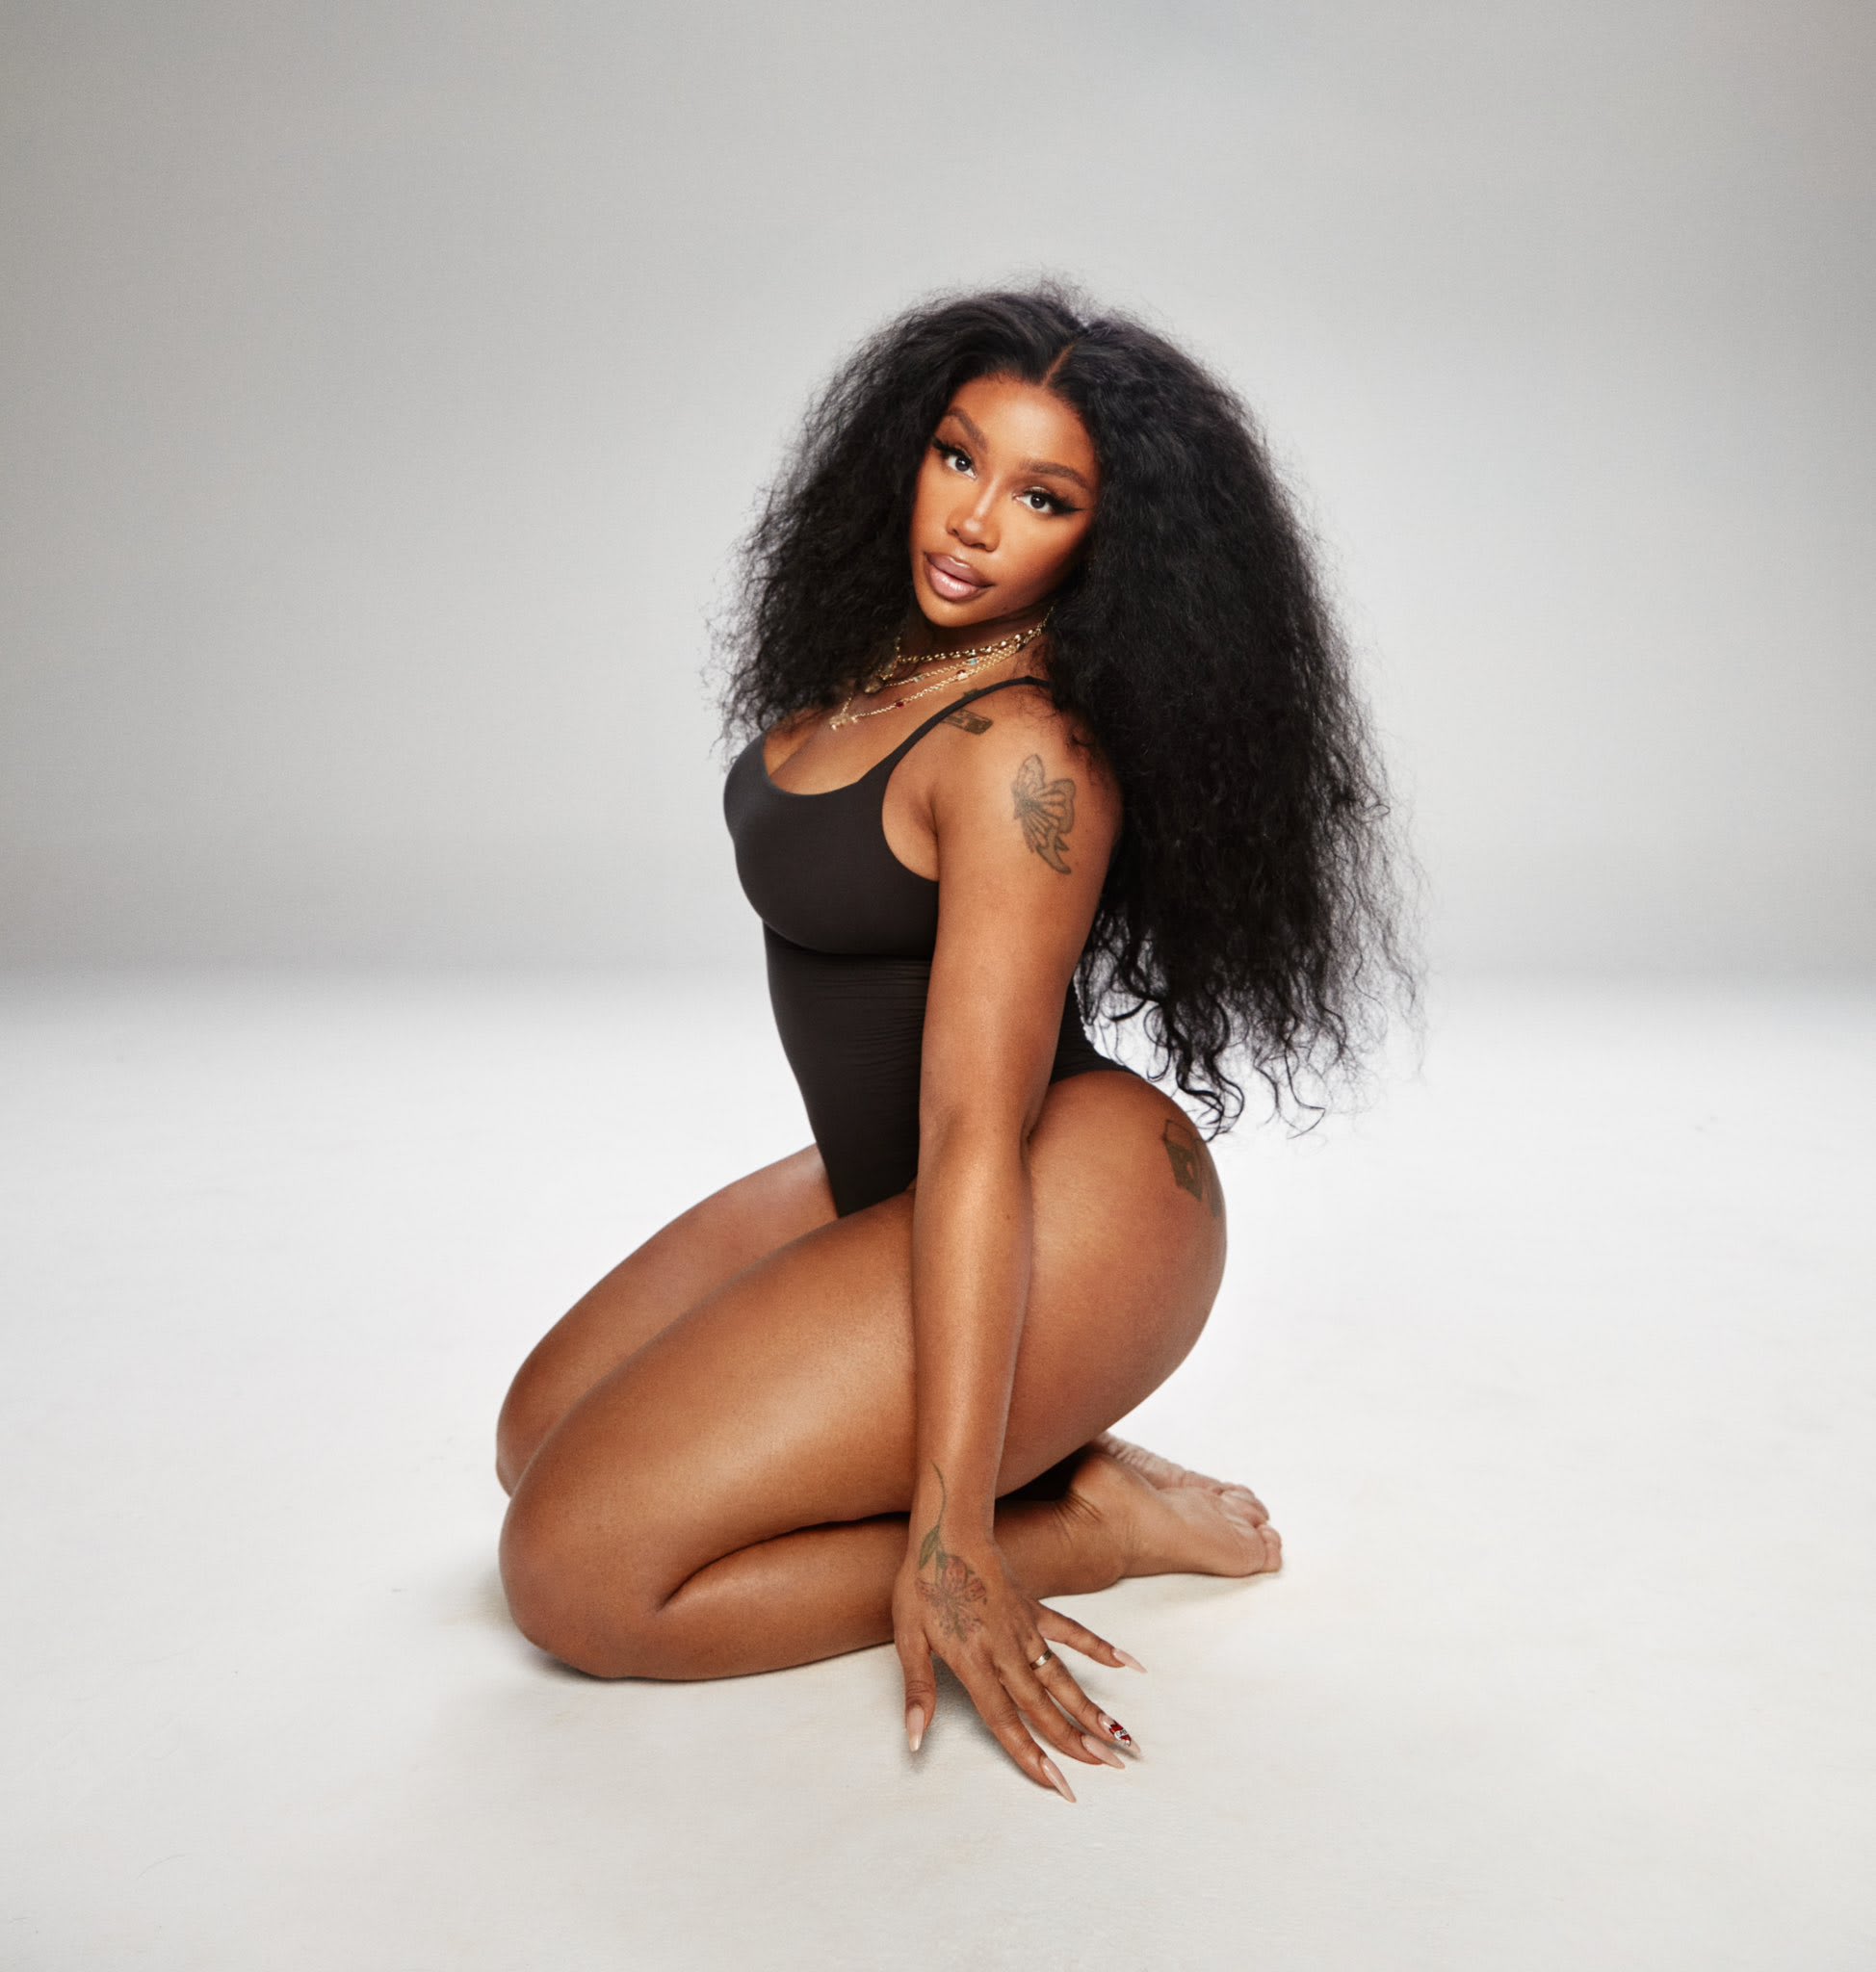 Kim Kardashian Dubs SZA 'Woman Of The Moment' For SKIMS Campaign